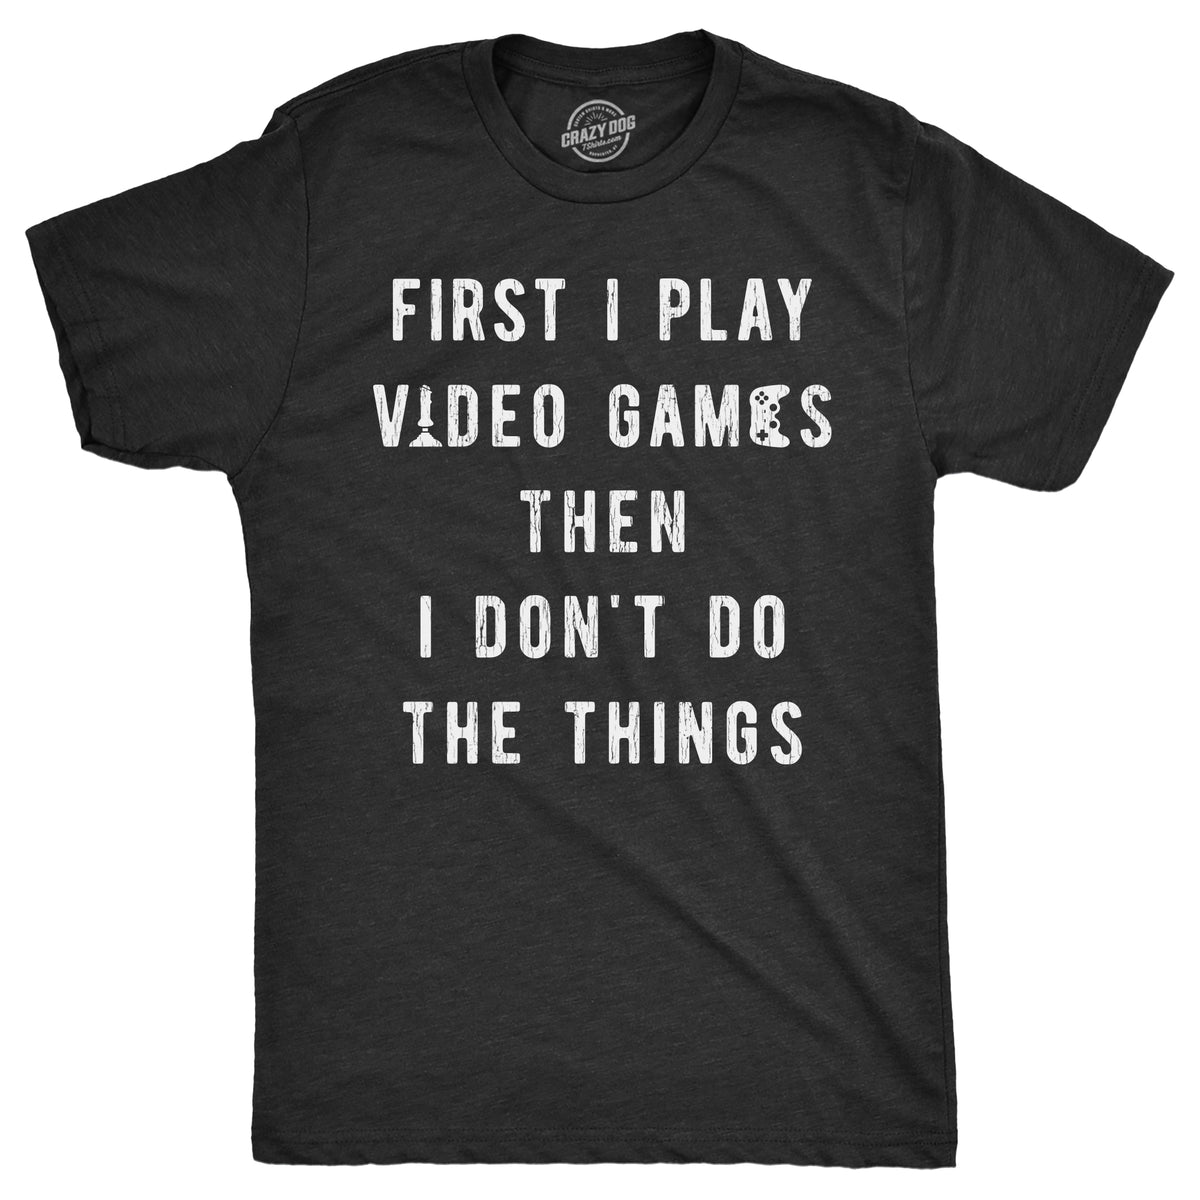 Funny Heather Black - First I Play First I Play Video Games Then I Dont Do The Things Mens T Shirt Nerdy Video Games Tee